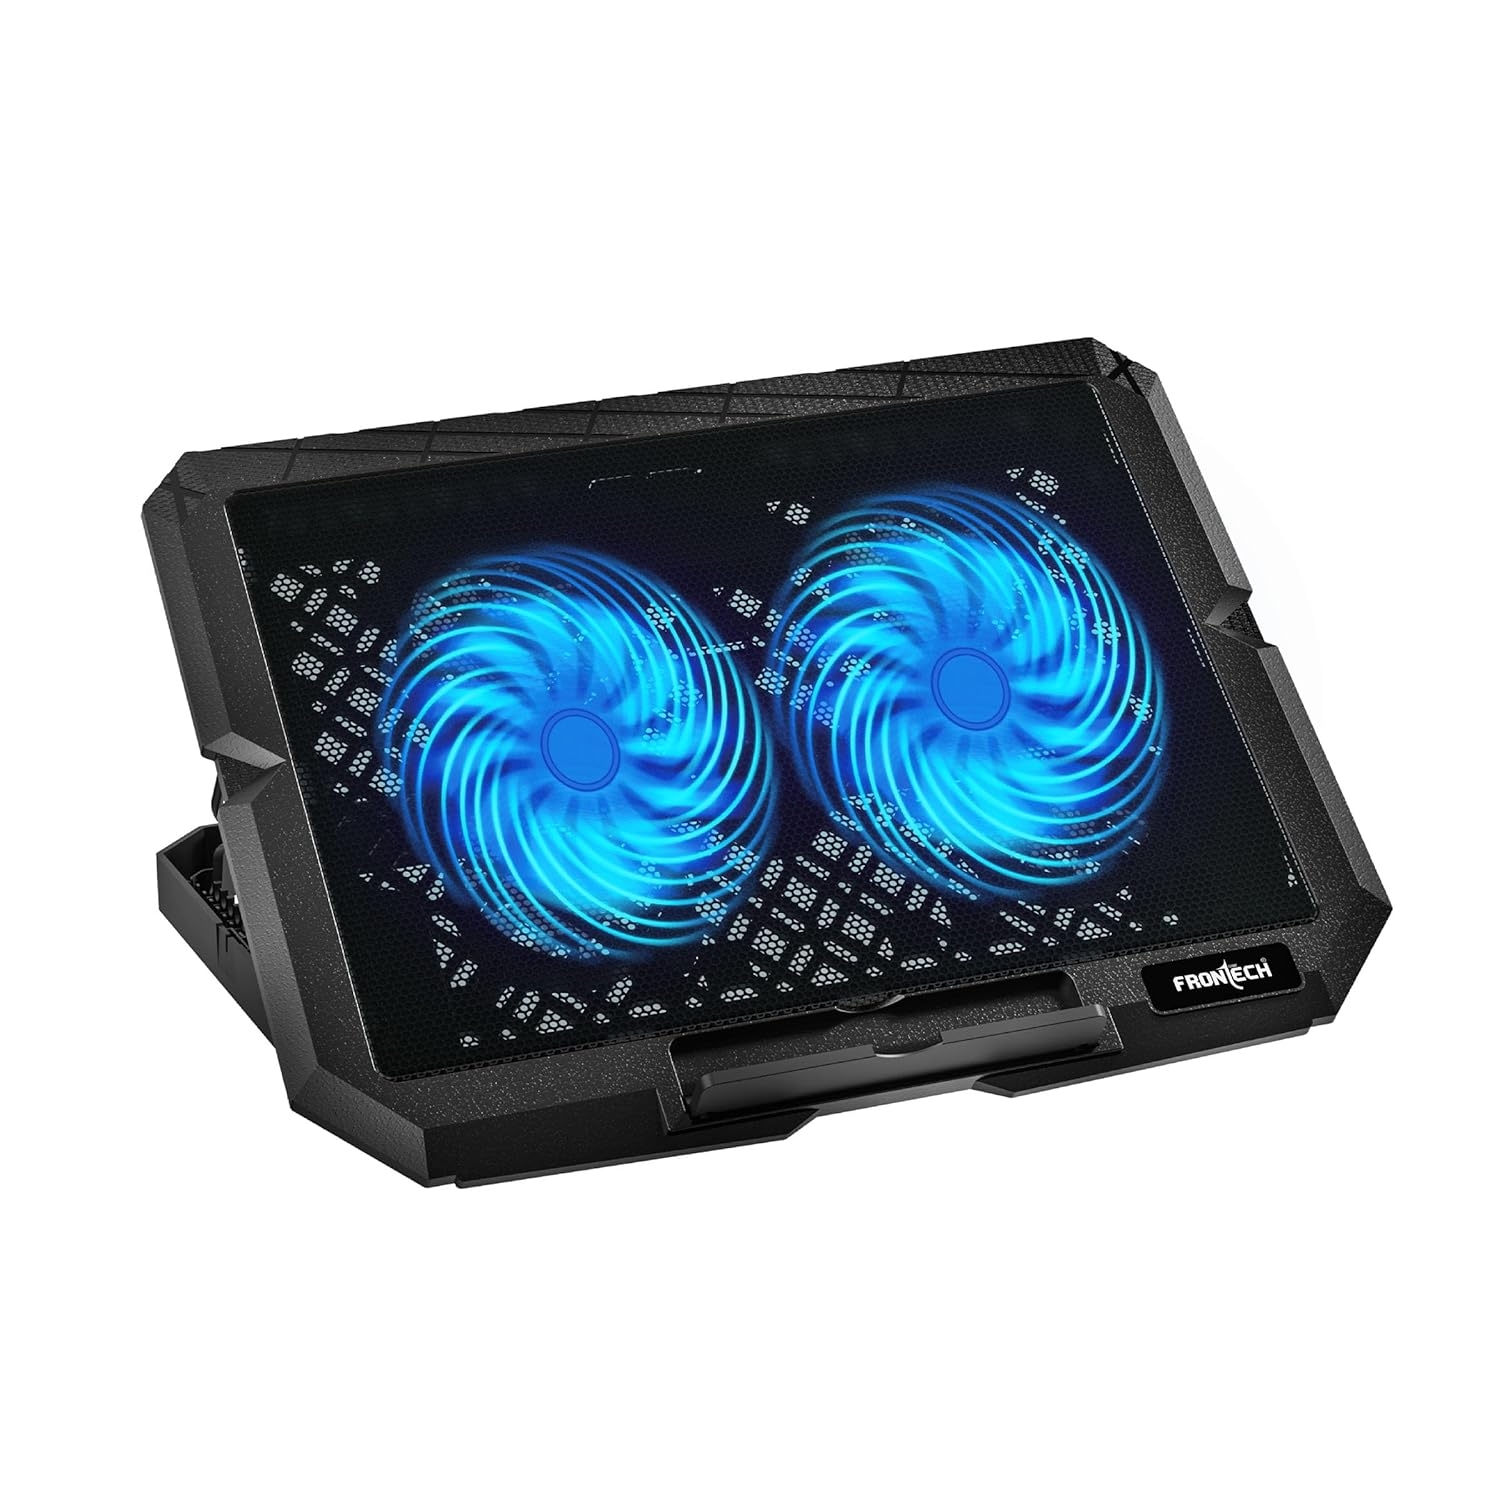 Frontech Adjustable Height Cooling Pad | 2x120mm LED Fans for 15.6